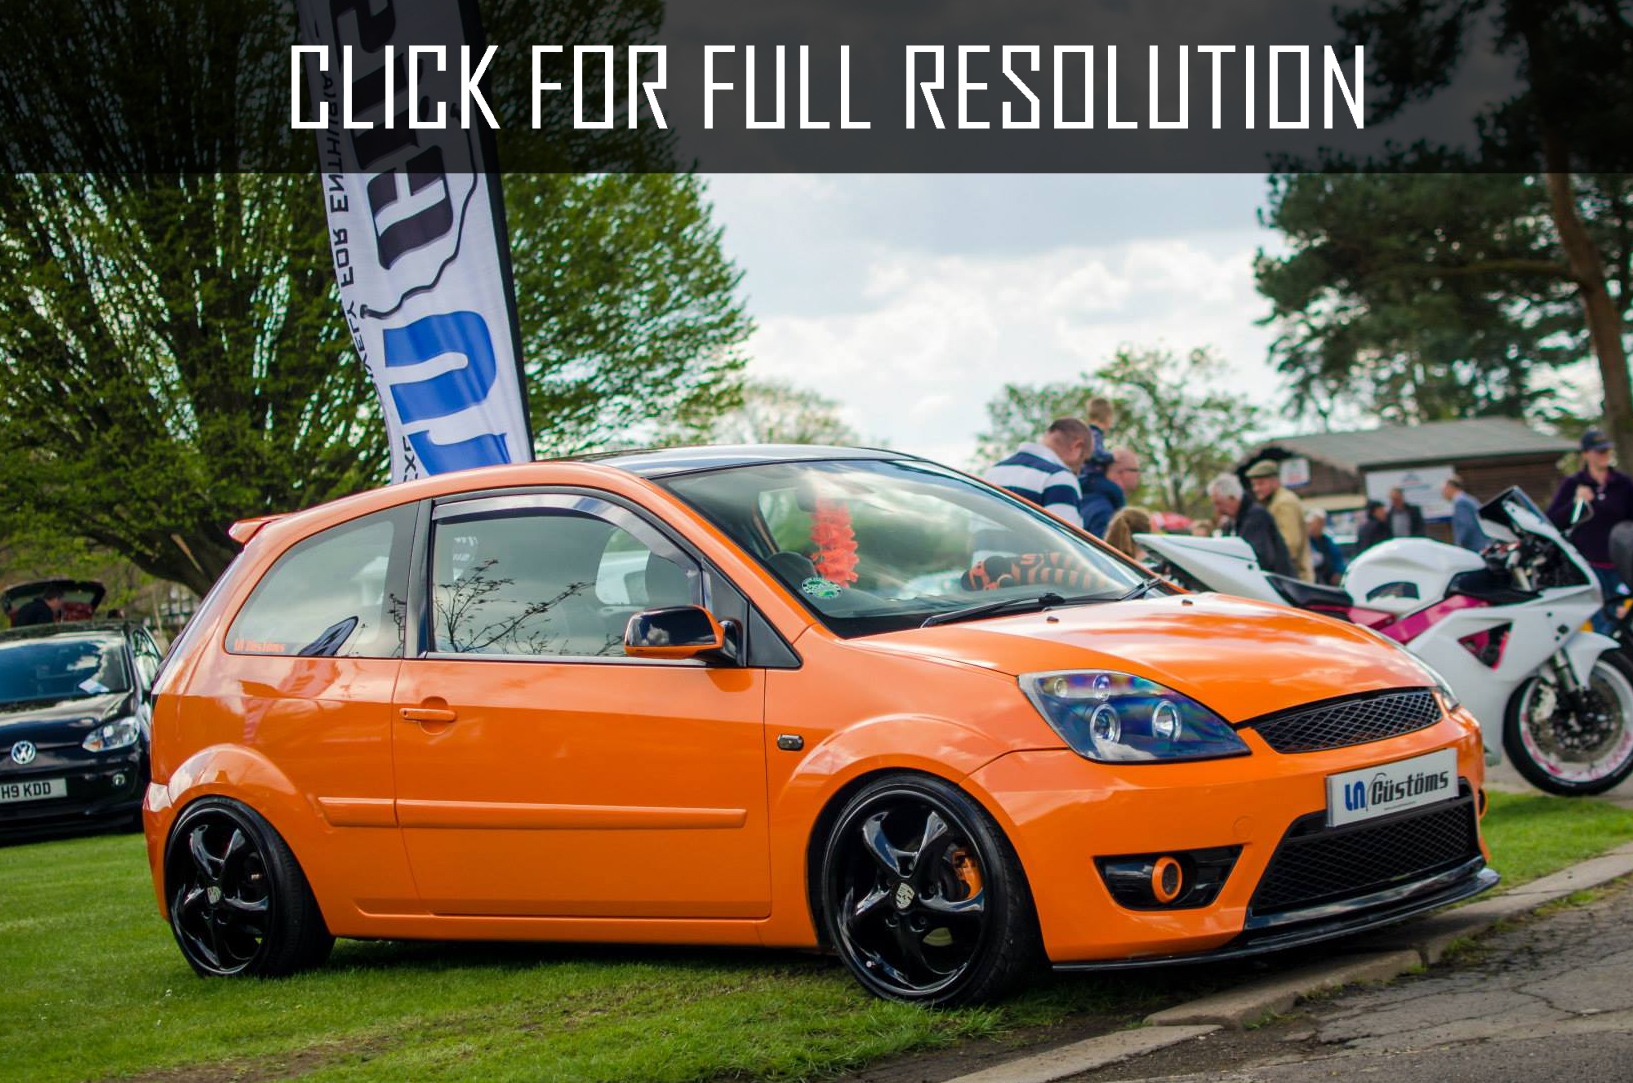 Ford Fiesta Zetec S Mk6 Amazing Photo Gallery Some Information And